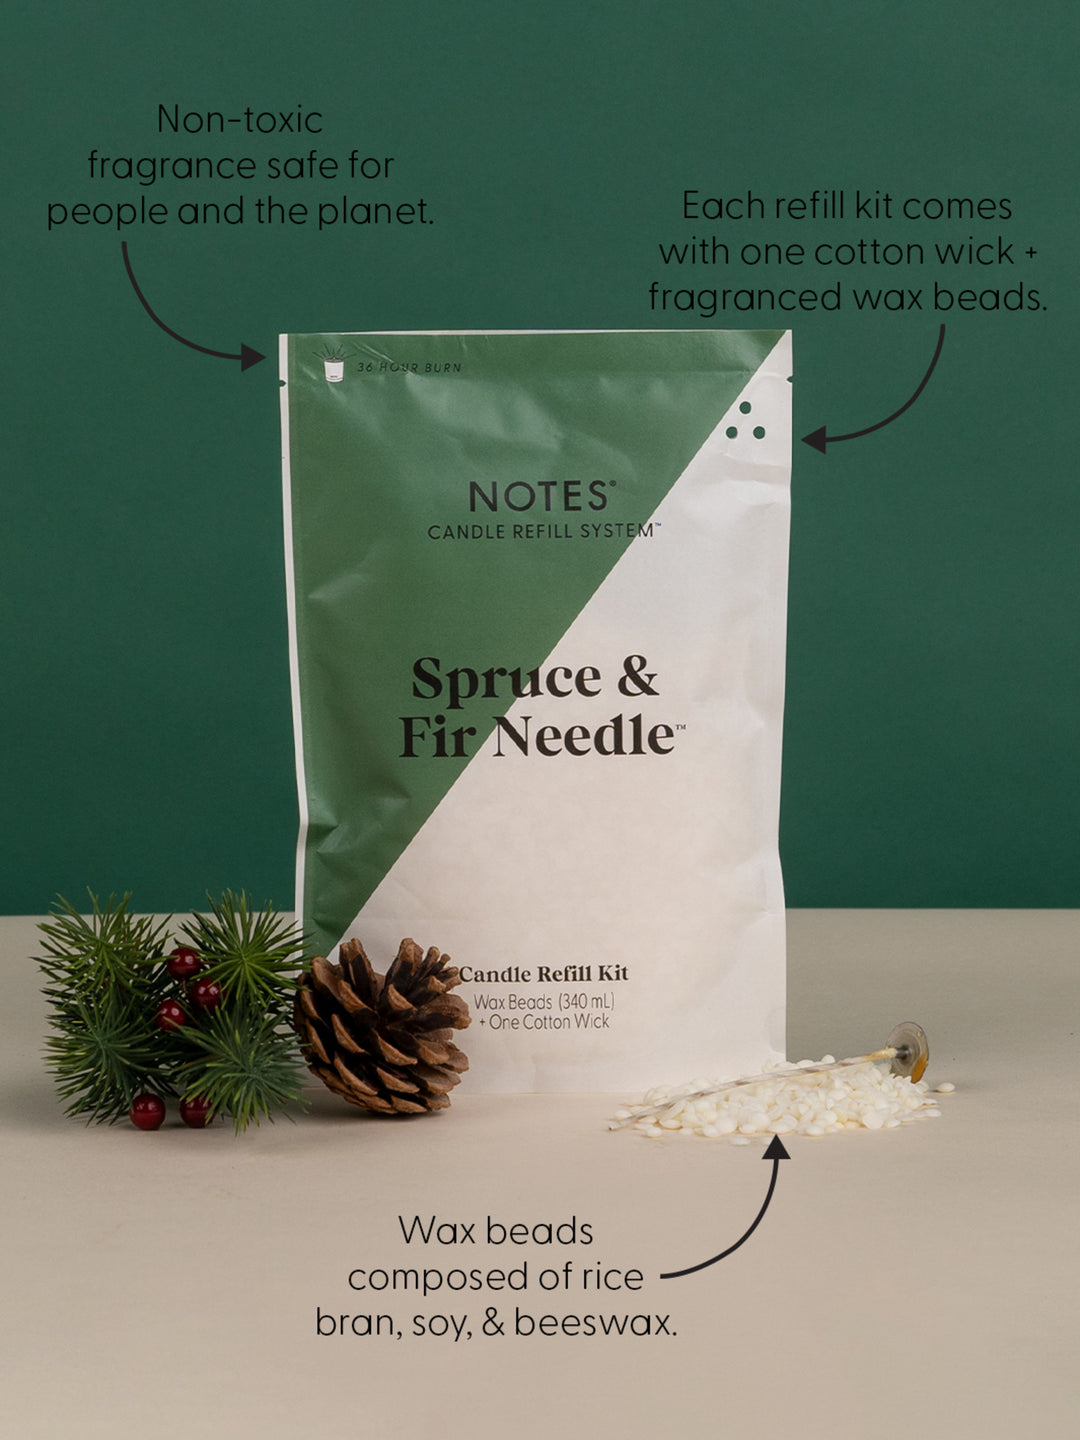 Sustainable Candle Refill Kit - NOTES Spruce & Fir Needle